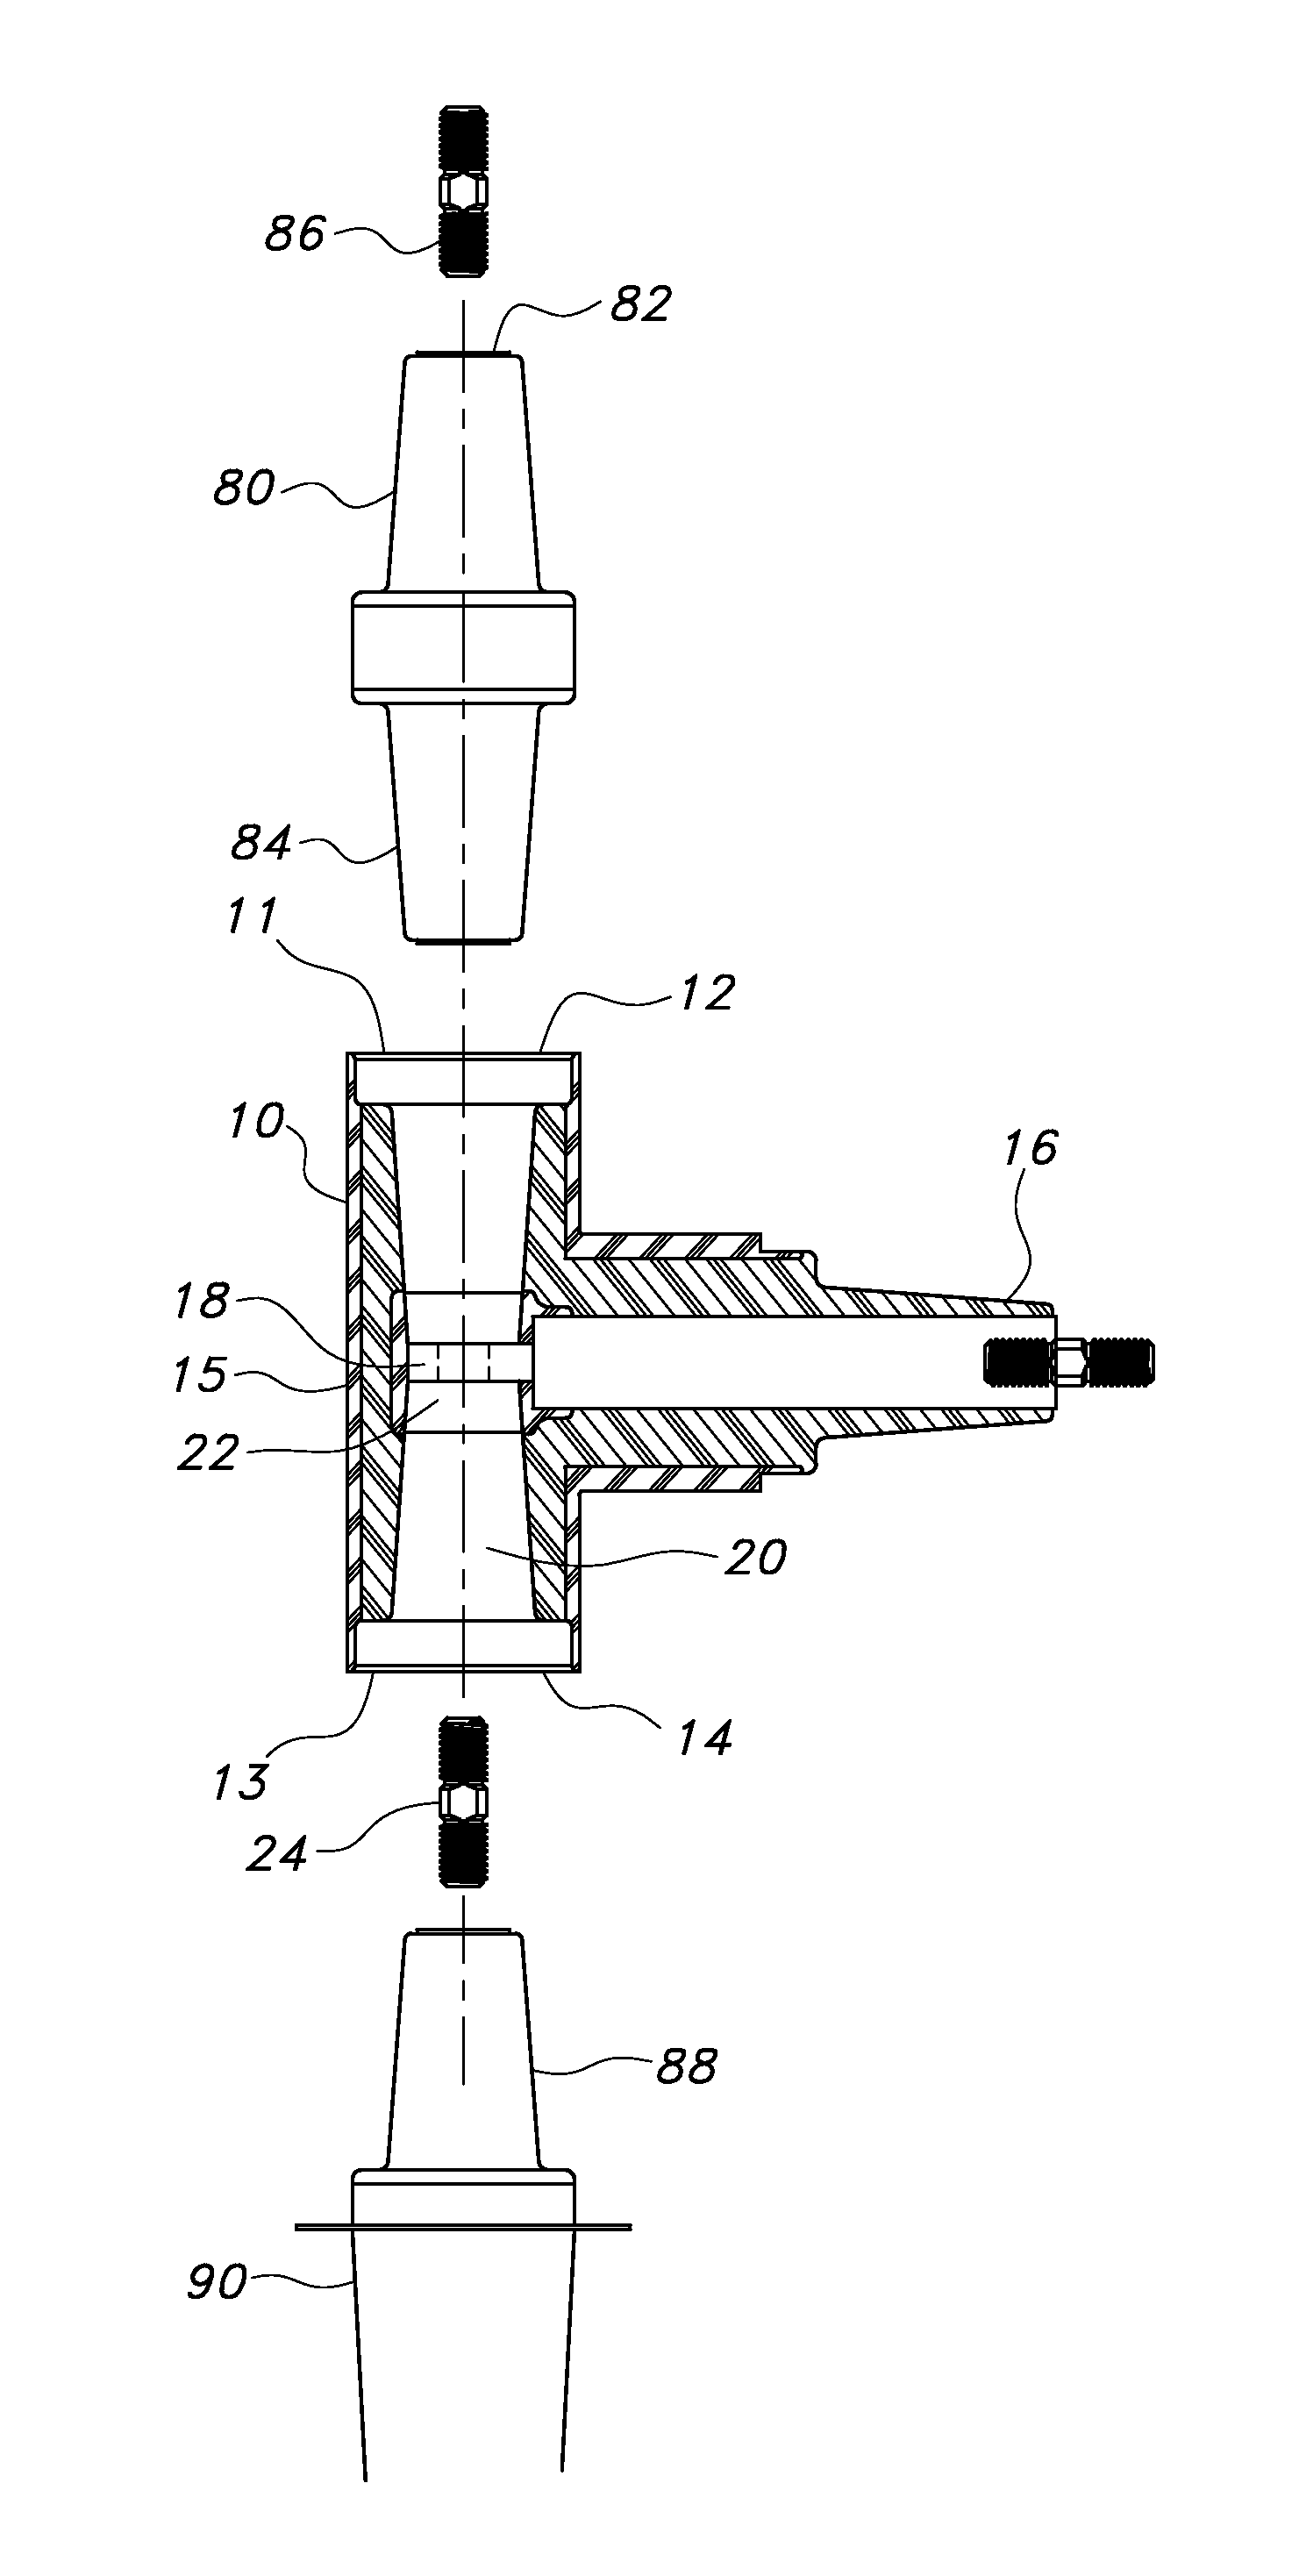 Electrical connector with multiple interfaces